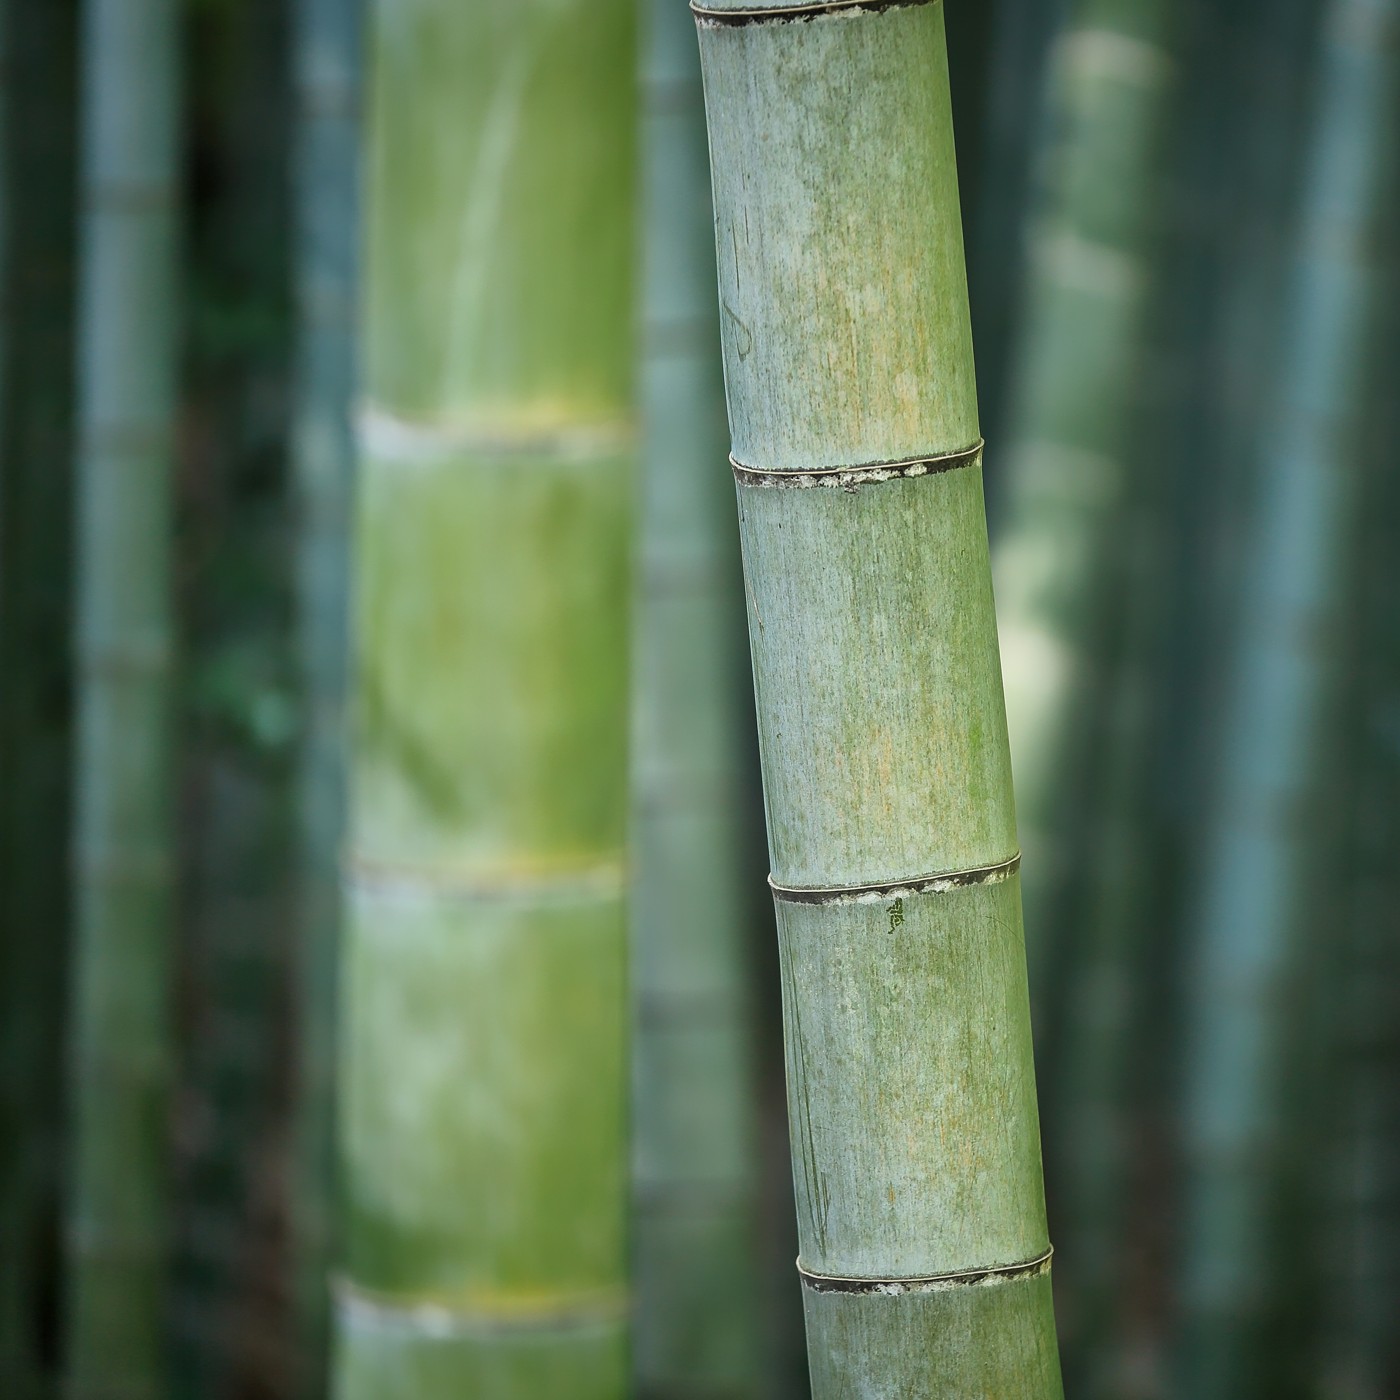 BAMBOO GARDEN • A Study Session Surrounded by Bamboo